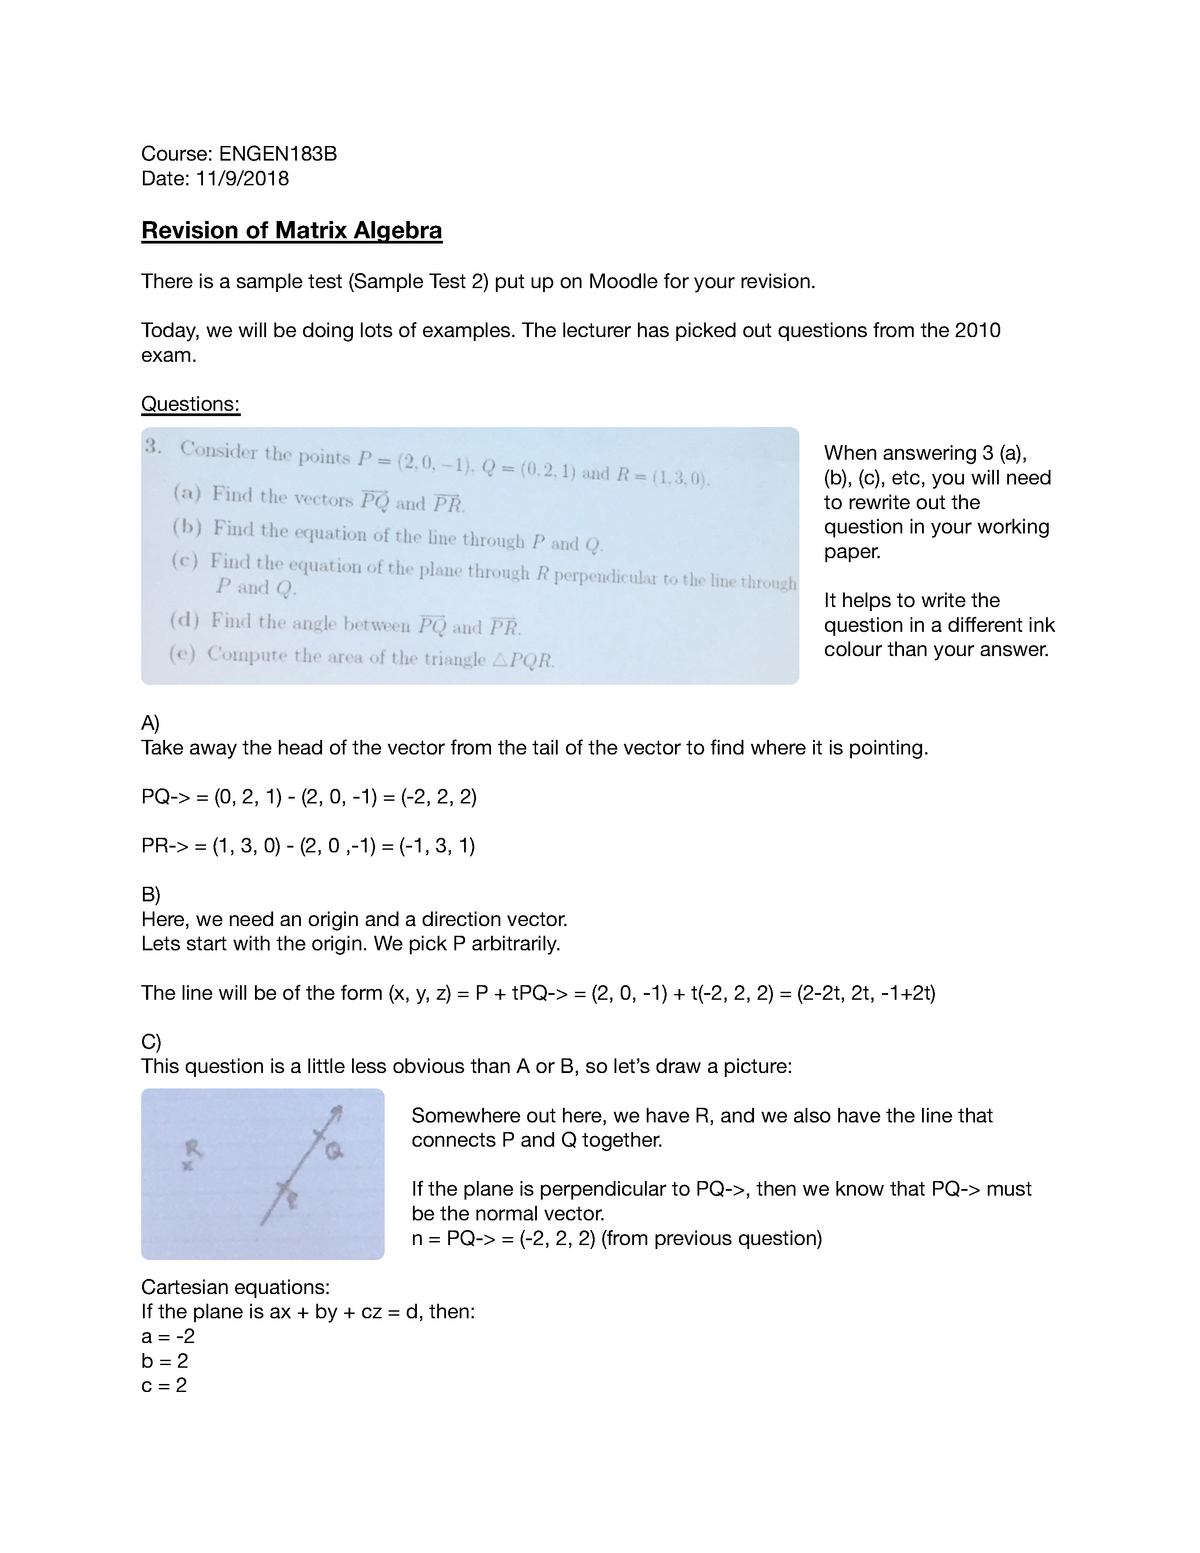 Engen1 B 11 09 18 Lecture Notes 29 Course Engen1b Date 11 Revision Of Matrix Algebra There Is Sample Test Sample Test Put Up On Moodle For Your Revision Studocu